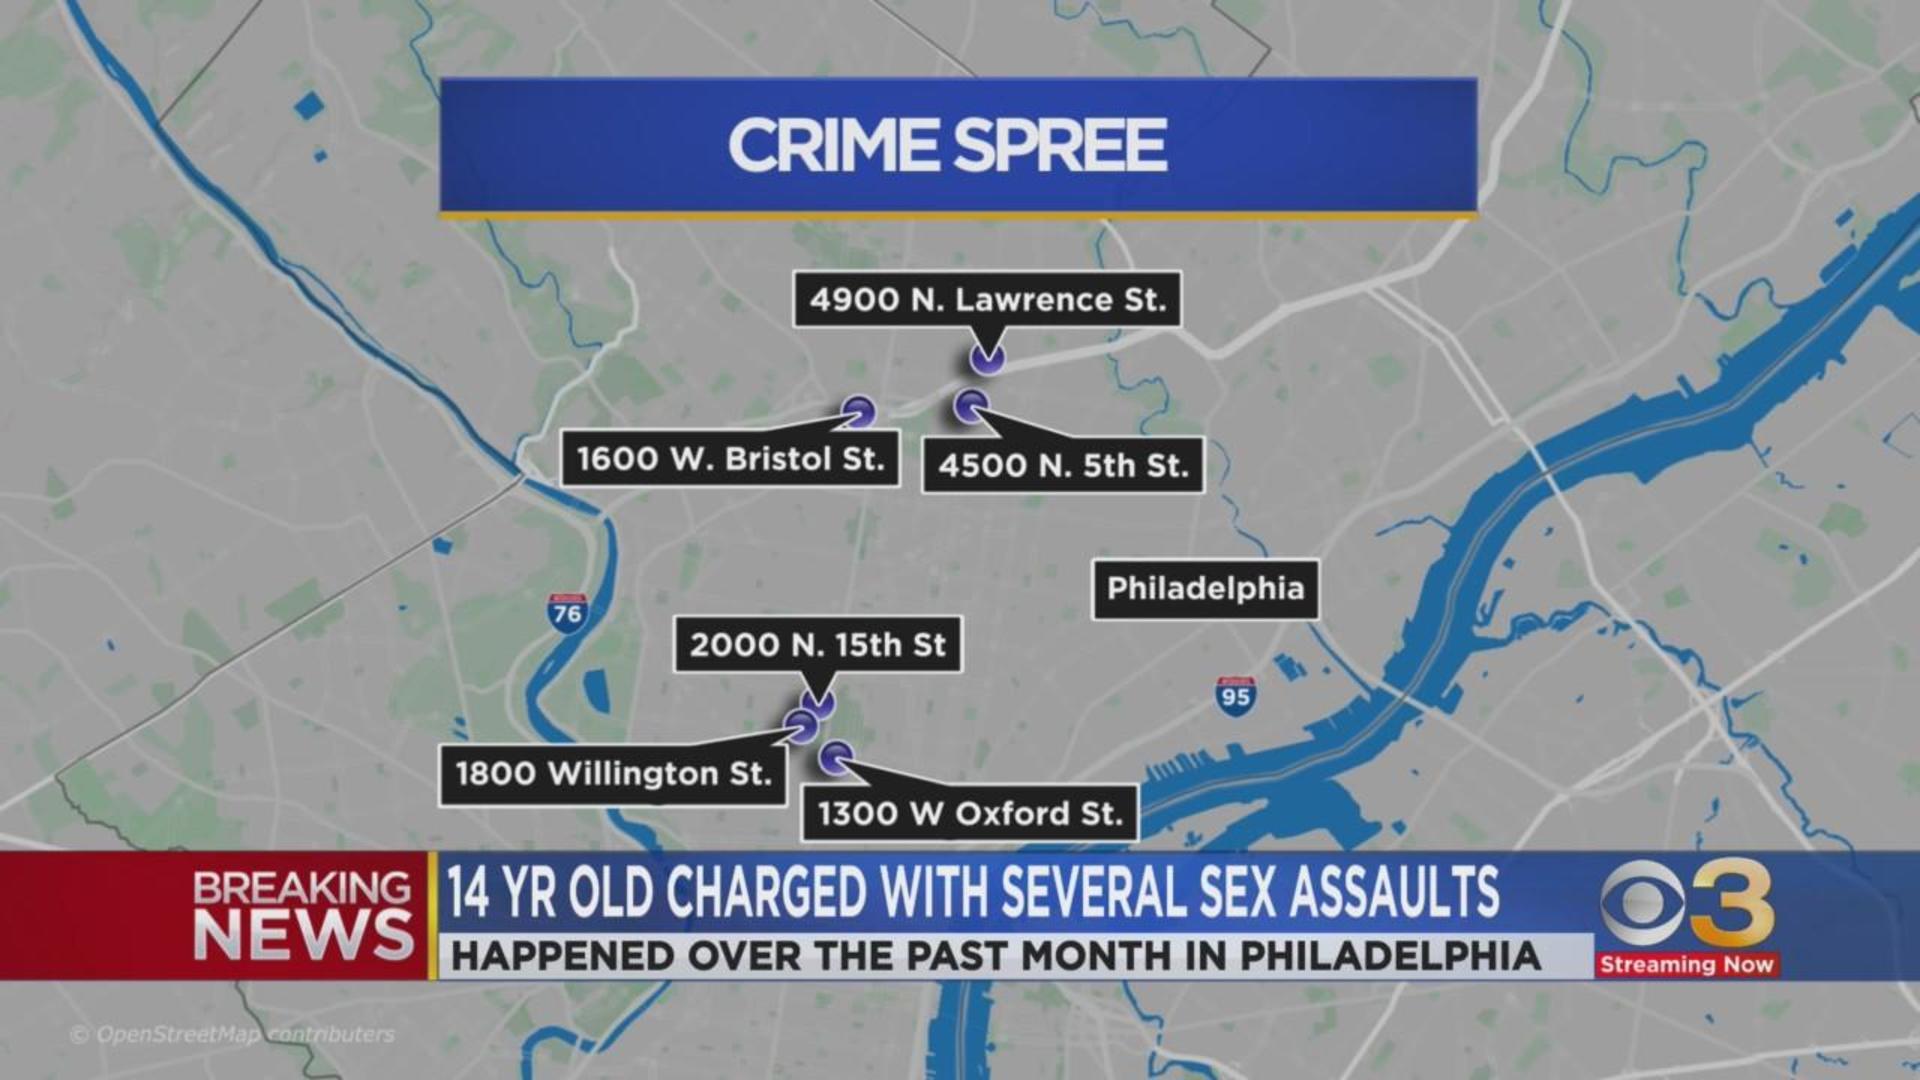 Update on 14-year-old boy charged with 6 sex assaults - CBS Philadelphia